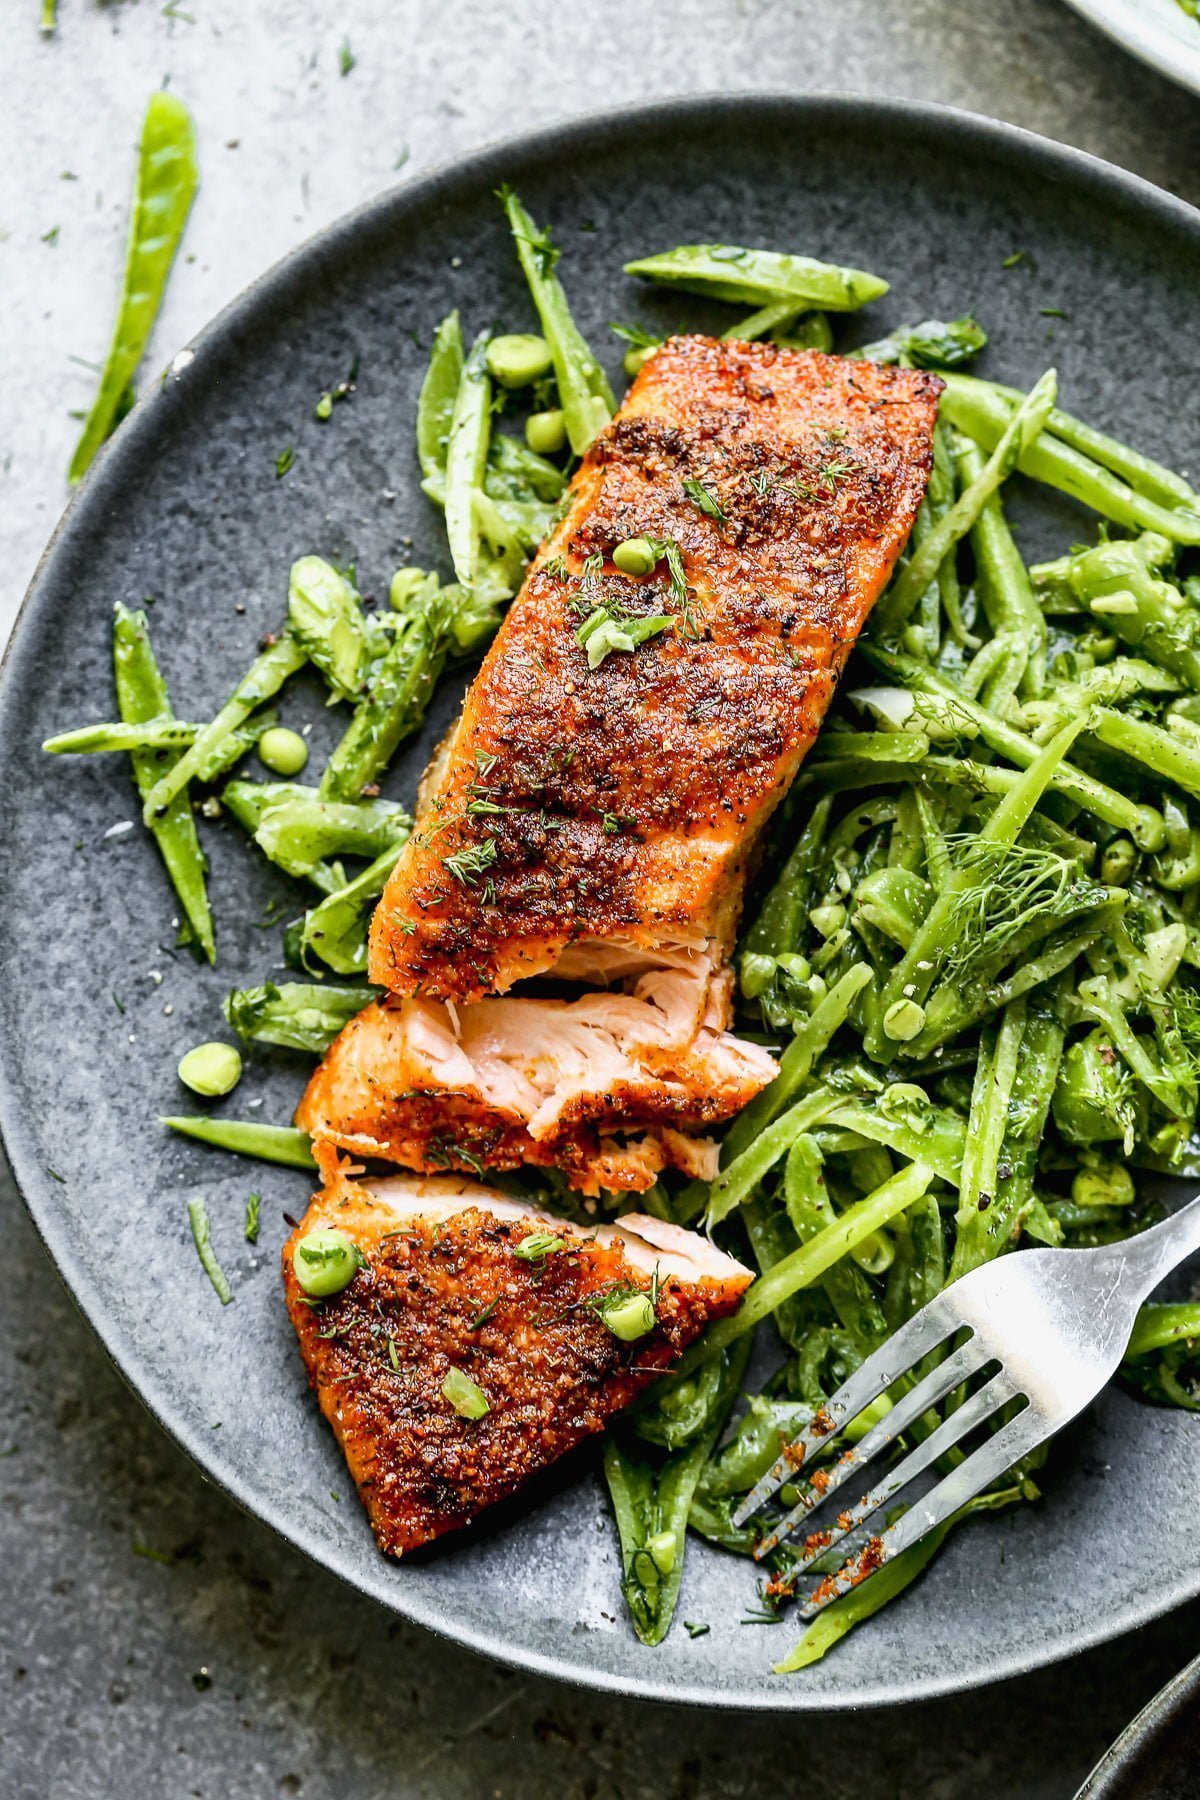 Want salmon that's ultra crispy on the outside, moist on the inside, and abundant with flavor? Head straight the grocery store and pick up the ingredients for our Blackened Air Fryer Salmon with Snap Pea Salad. This bright, spring-forward meal comes together in less than 30 minutes and will certainly find a home in your weekly dinner rotation. 